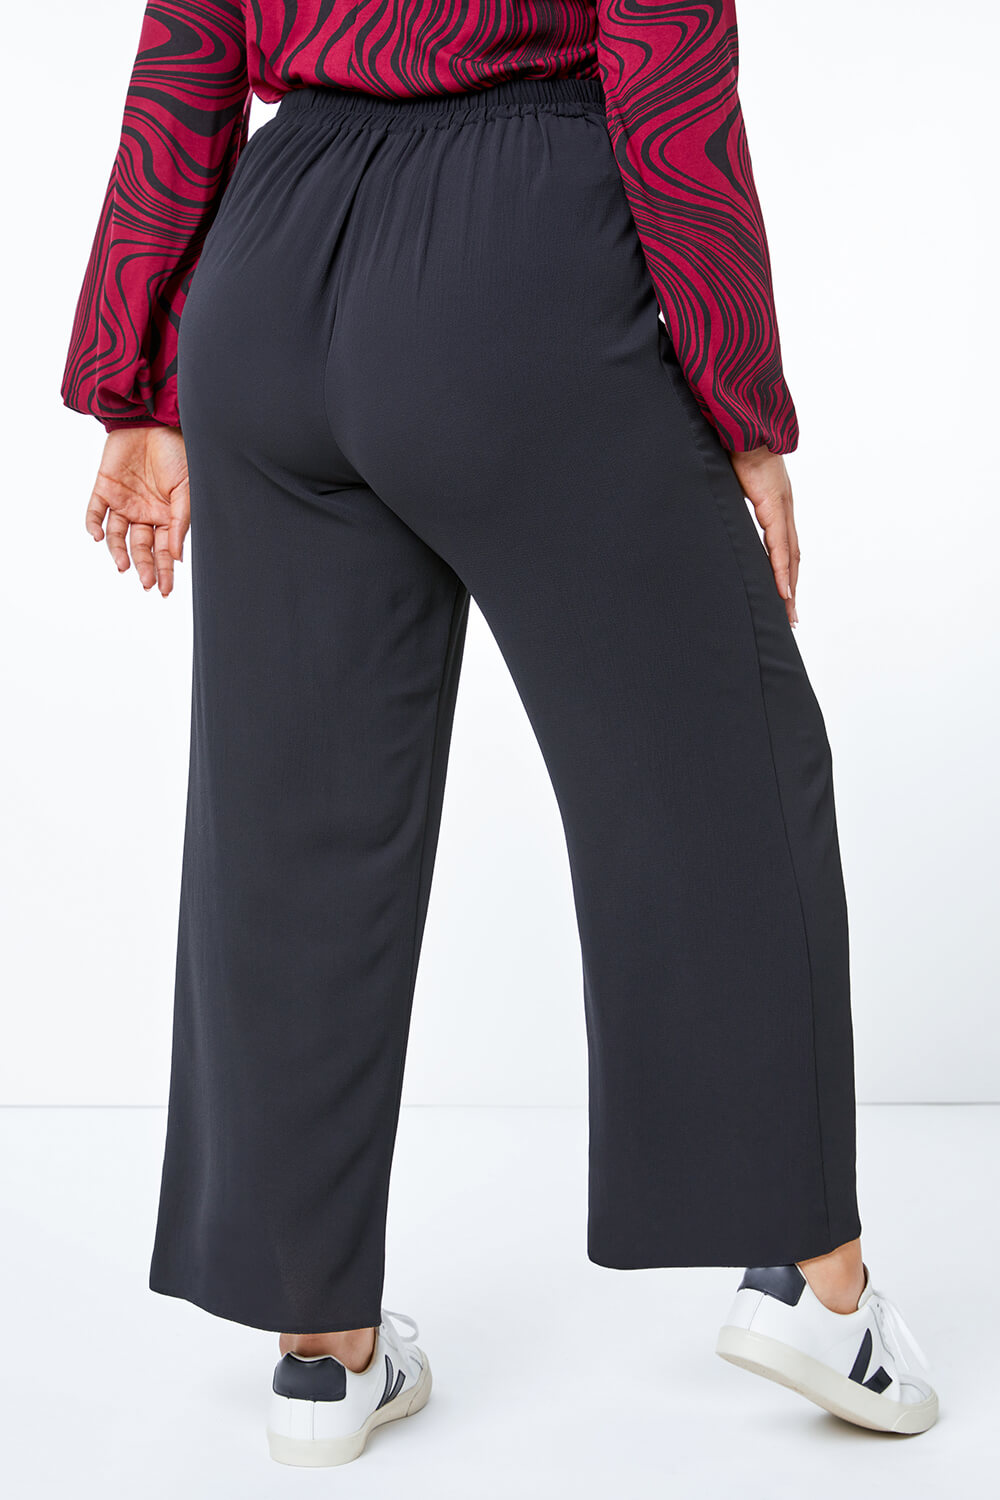 Black Curve Wide Leg Trousers, Image 3 of 4